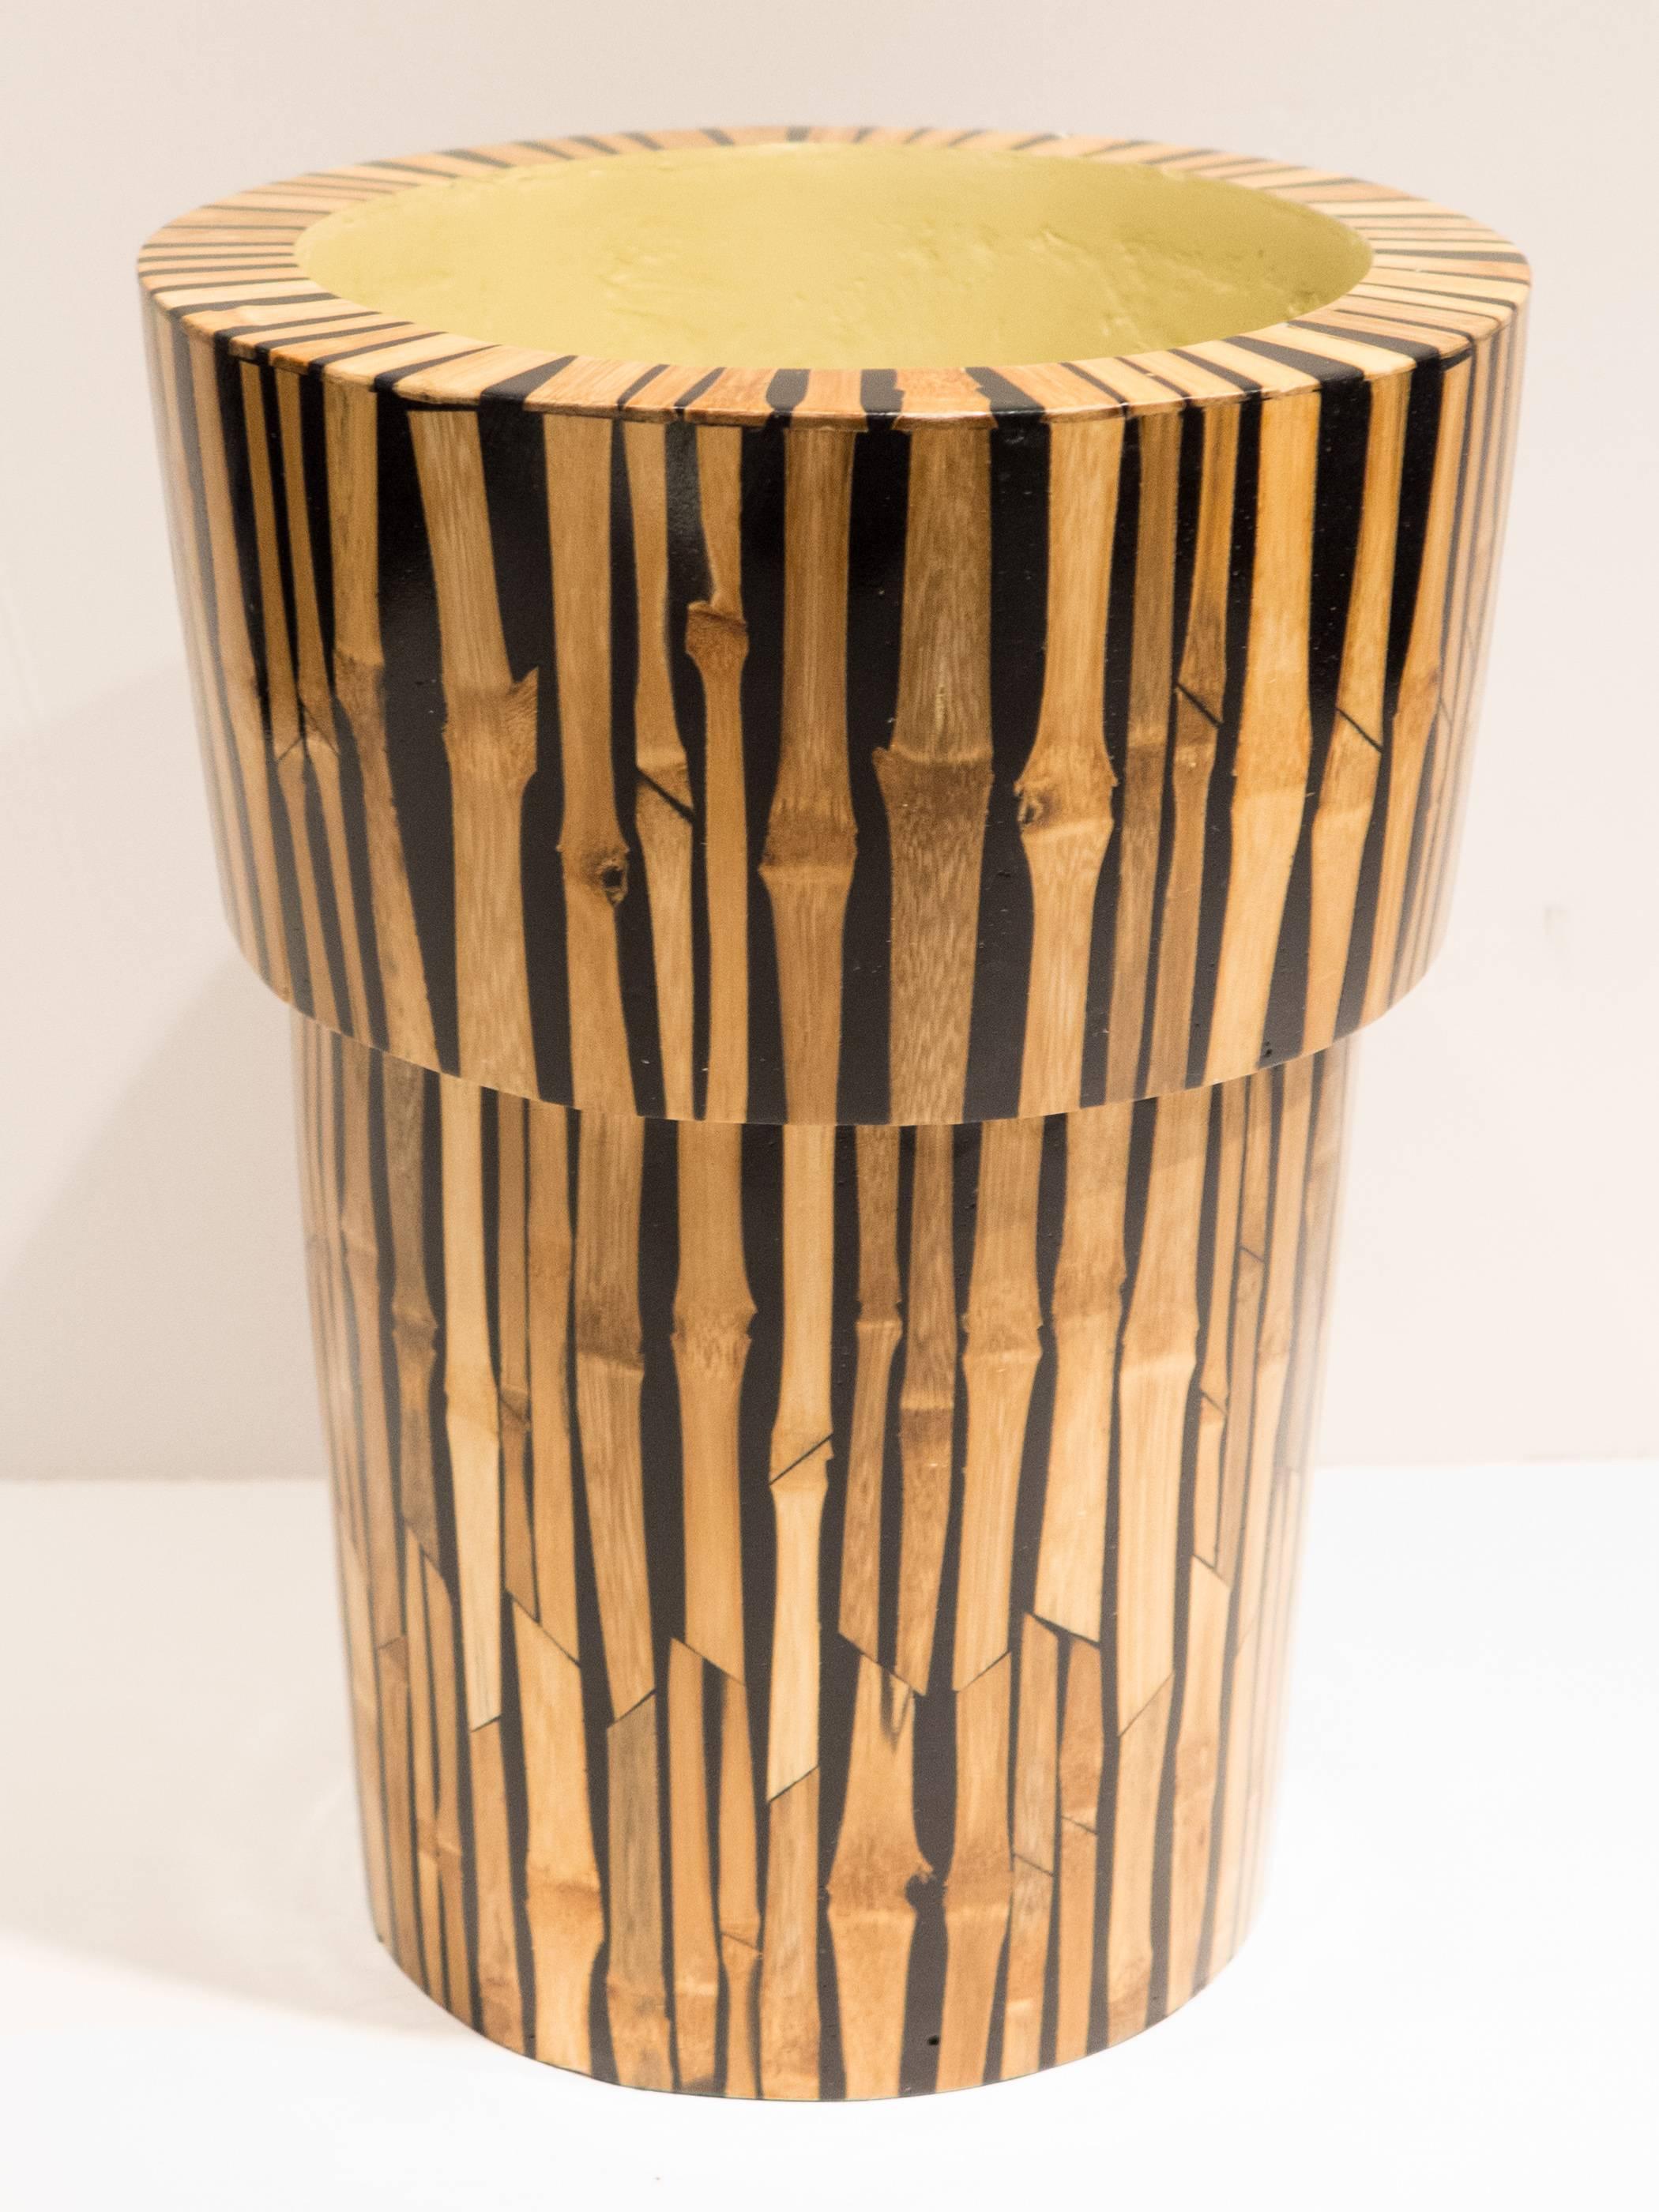 Tall wooden ridged vase with vividly-patterned bamboo inlaid exterior and painted interior. Made in the Philippines, circa 1990s for Ria & Yiouri Augousti of Paris.